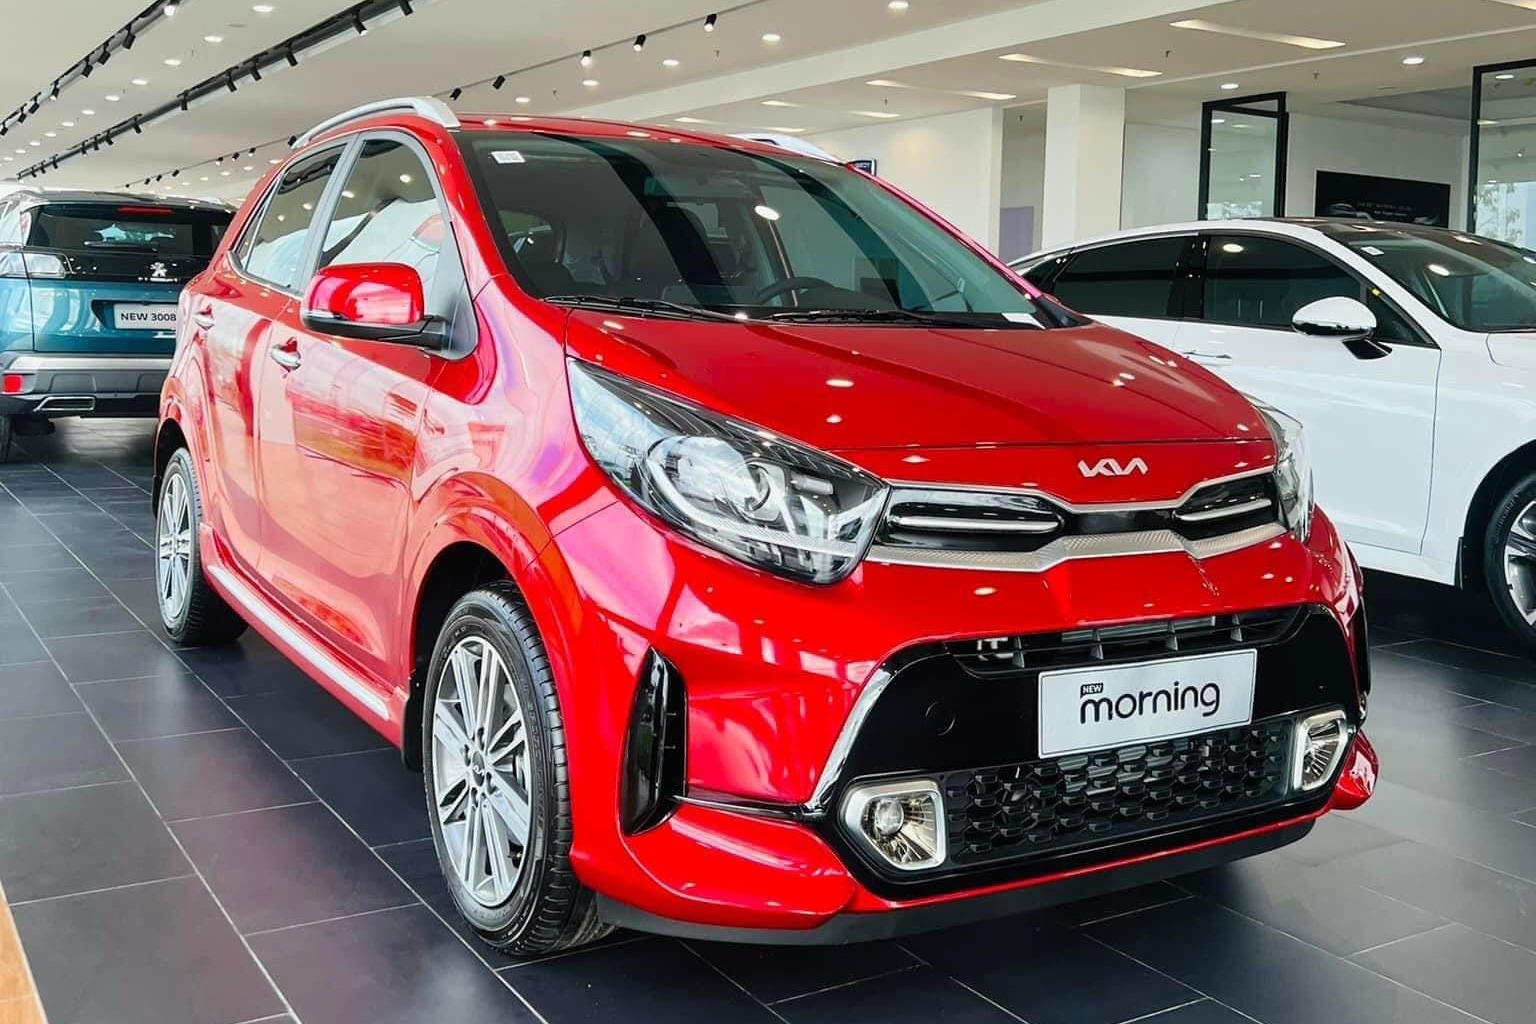 Kia Morning also received a significant discount in this price adjustment, only 349 million VND.  The Morning's counterpart competitor is the i10, which costs 360 million VND - Photo: Kia Dealer/Facebook